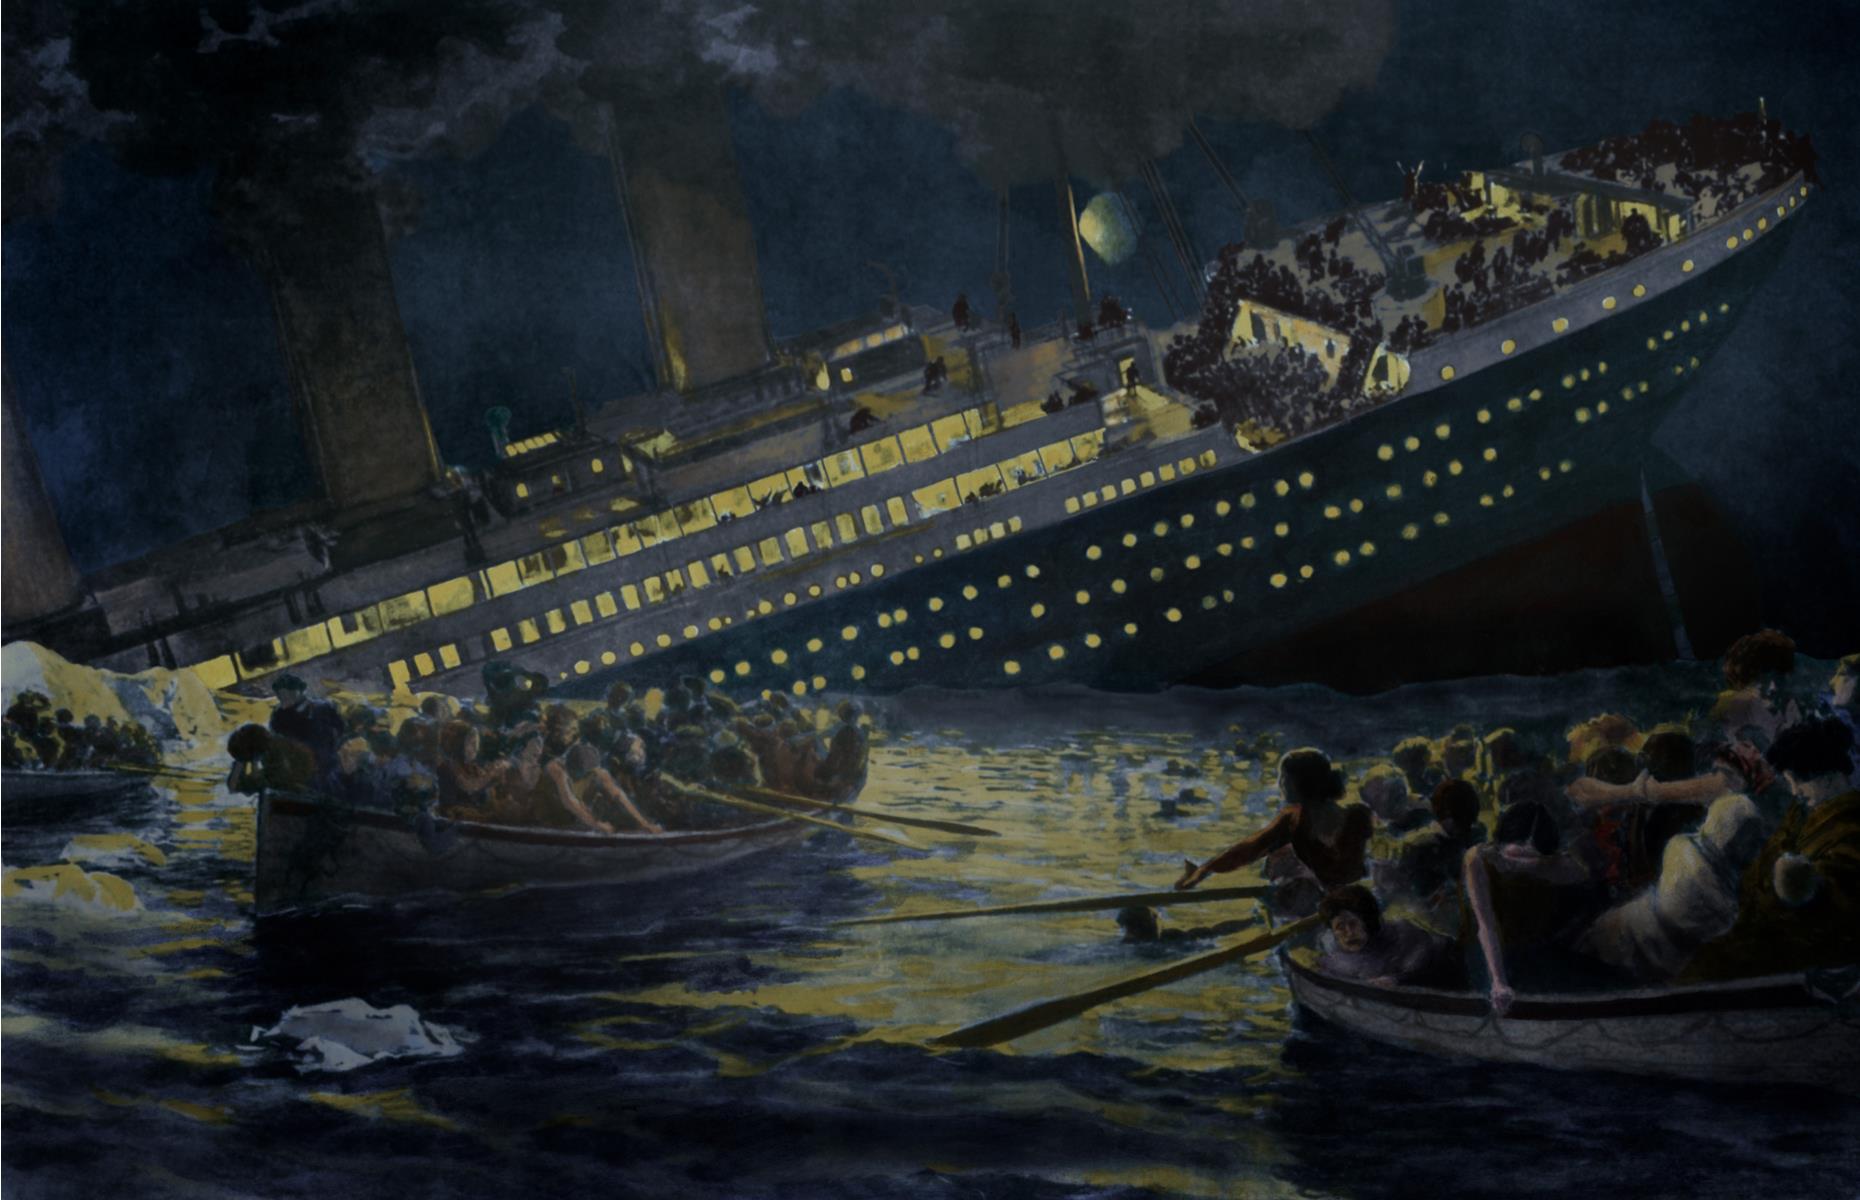 <p>Many factors led to the tragedy: the claim that the Titanic – at the time the largest ship ever built – was unsinkable, the unusual combination of weather that drove icebergs further south than usual and the lack of lifeboats all played a part in the shocking death toll. Yet it's the stories of the celebrities of the day that were onboard, the sheer size and splendor of the ship, and how it highlighted the Edwardian class divide that have captivated people through the decades. </p>